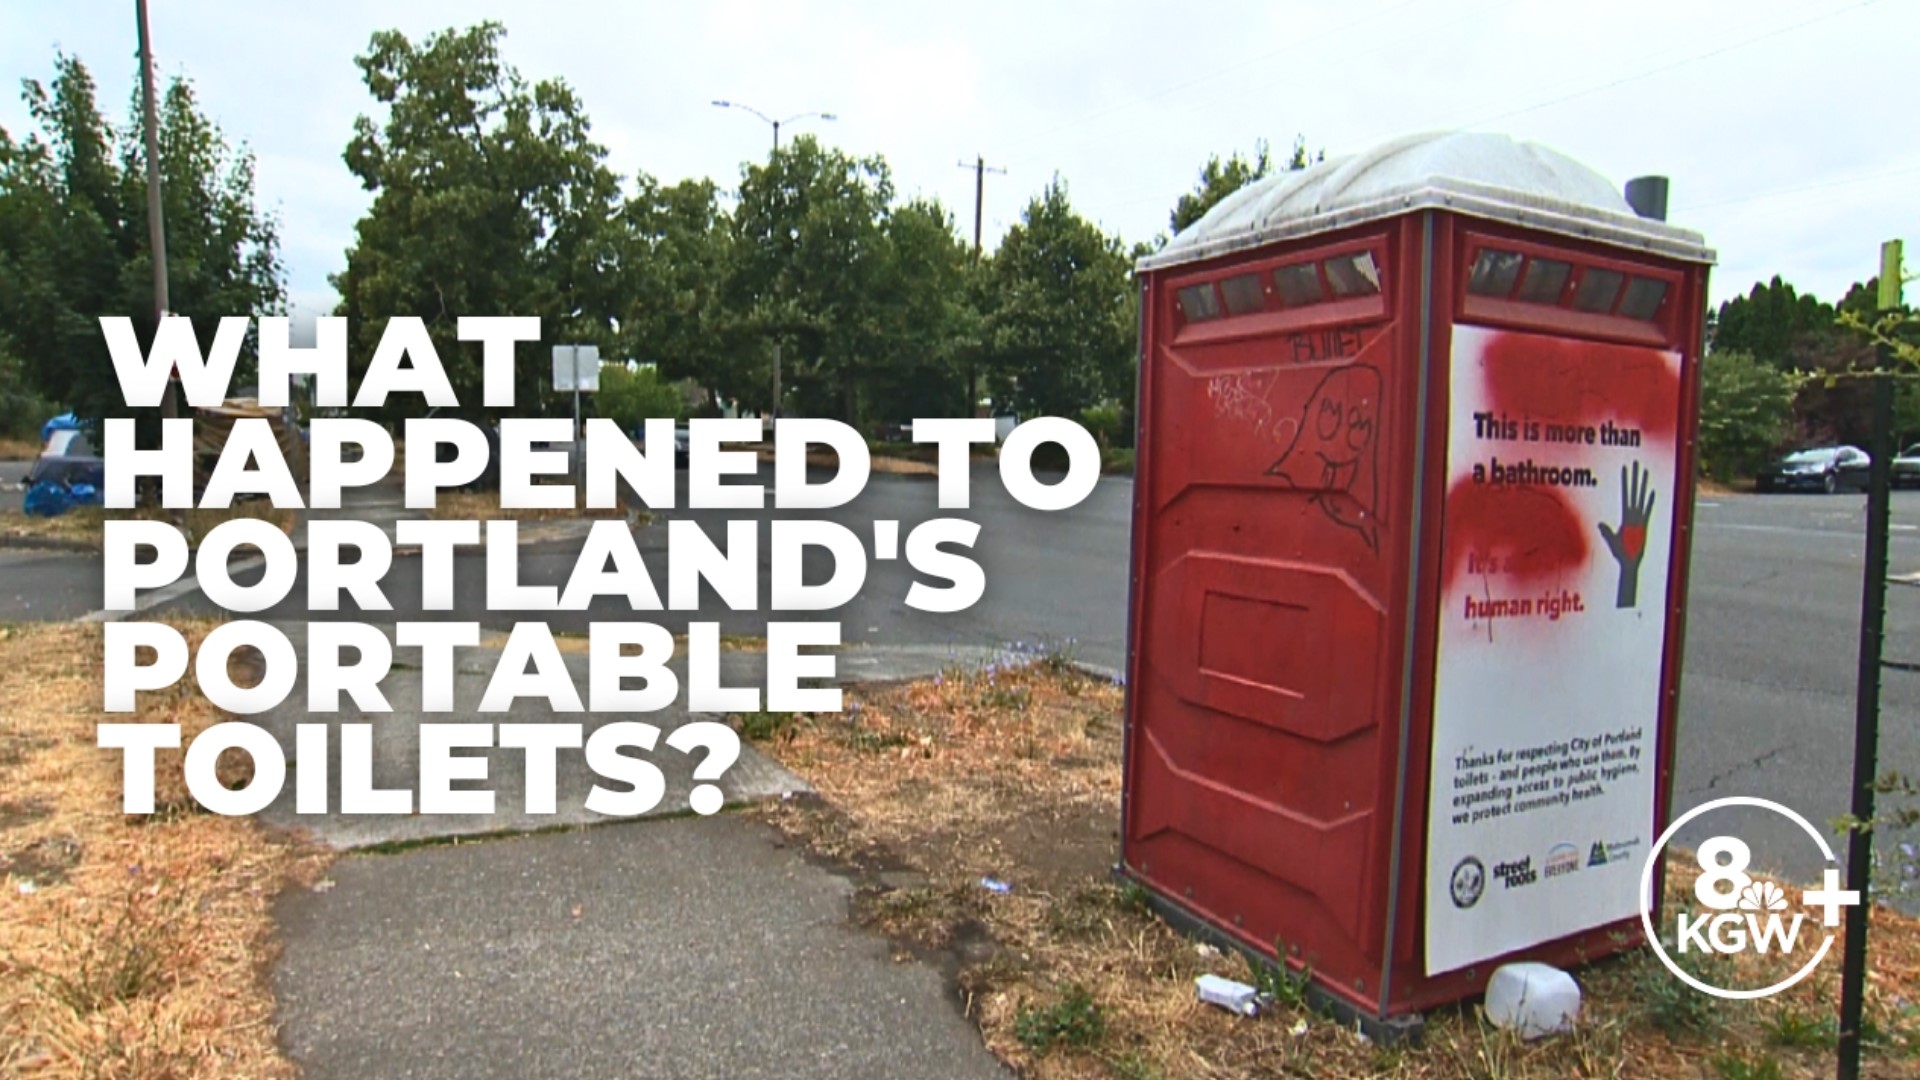 In 2020, the city of Portland put out 130 red portable toilets to help homeless people have access to clean restrooms. Now, three years later, most of them are gone.